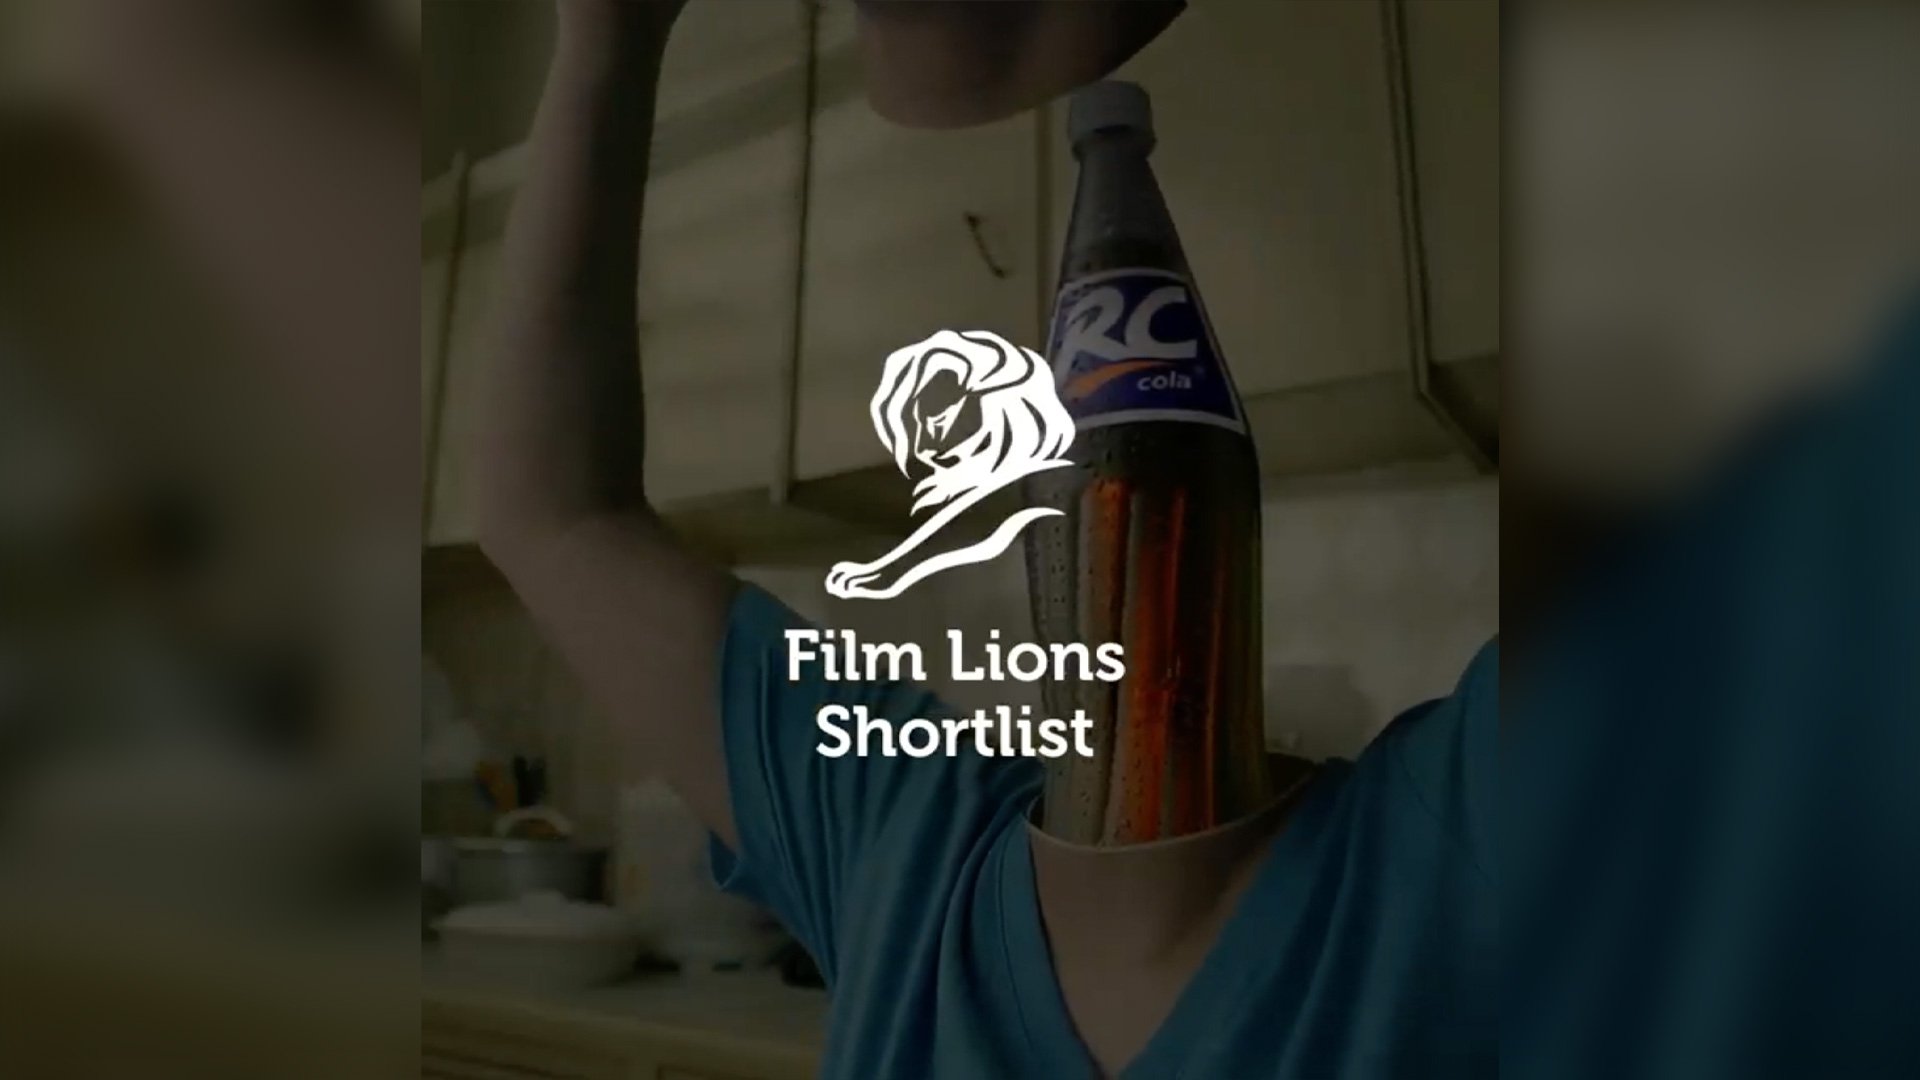 More than a viral issue- GIGIL’s RC Cola campaign advances to Cannes’ Film Lion shortlist